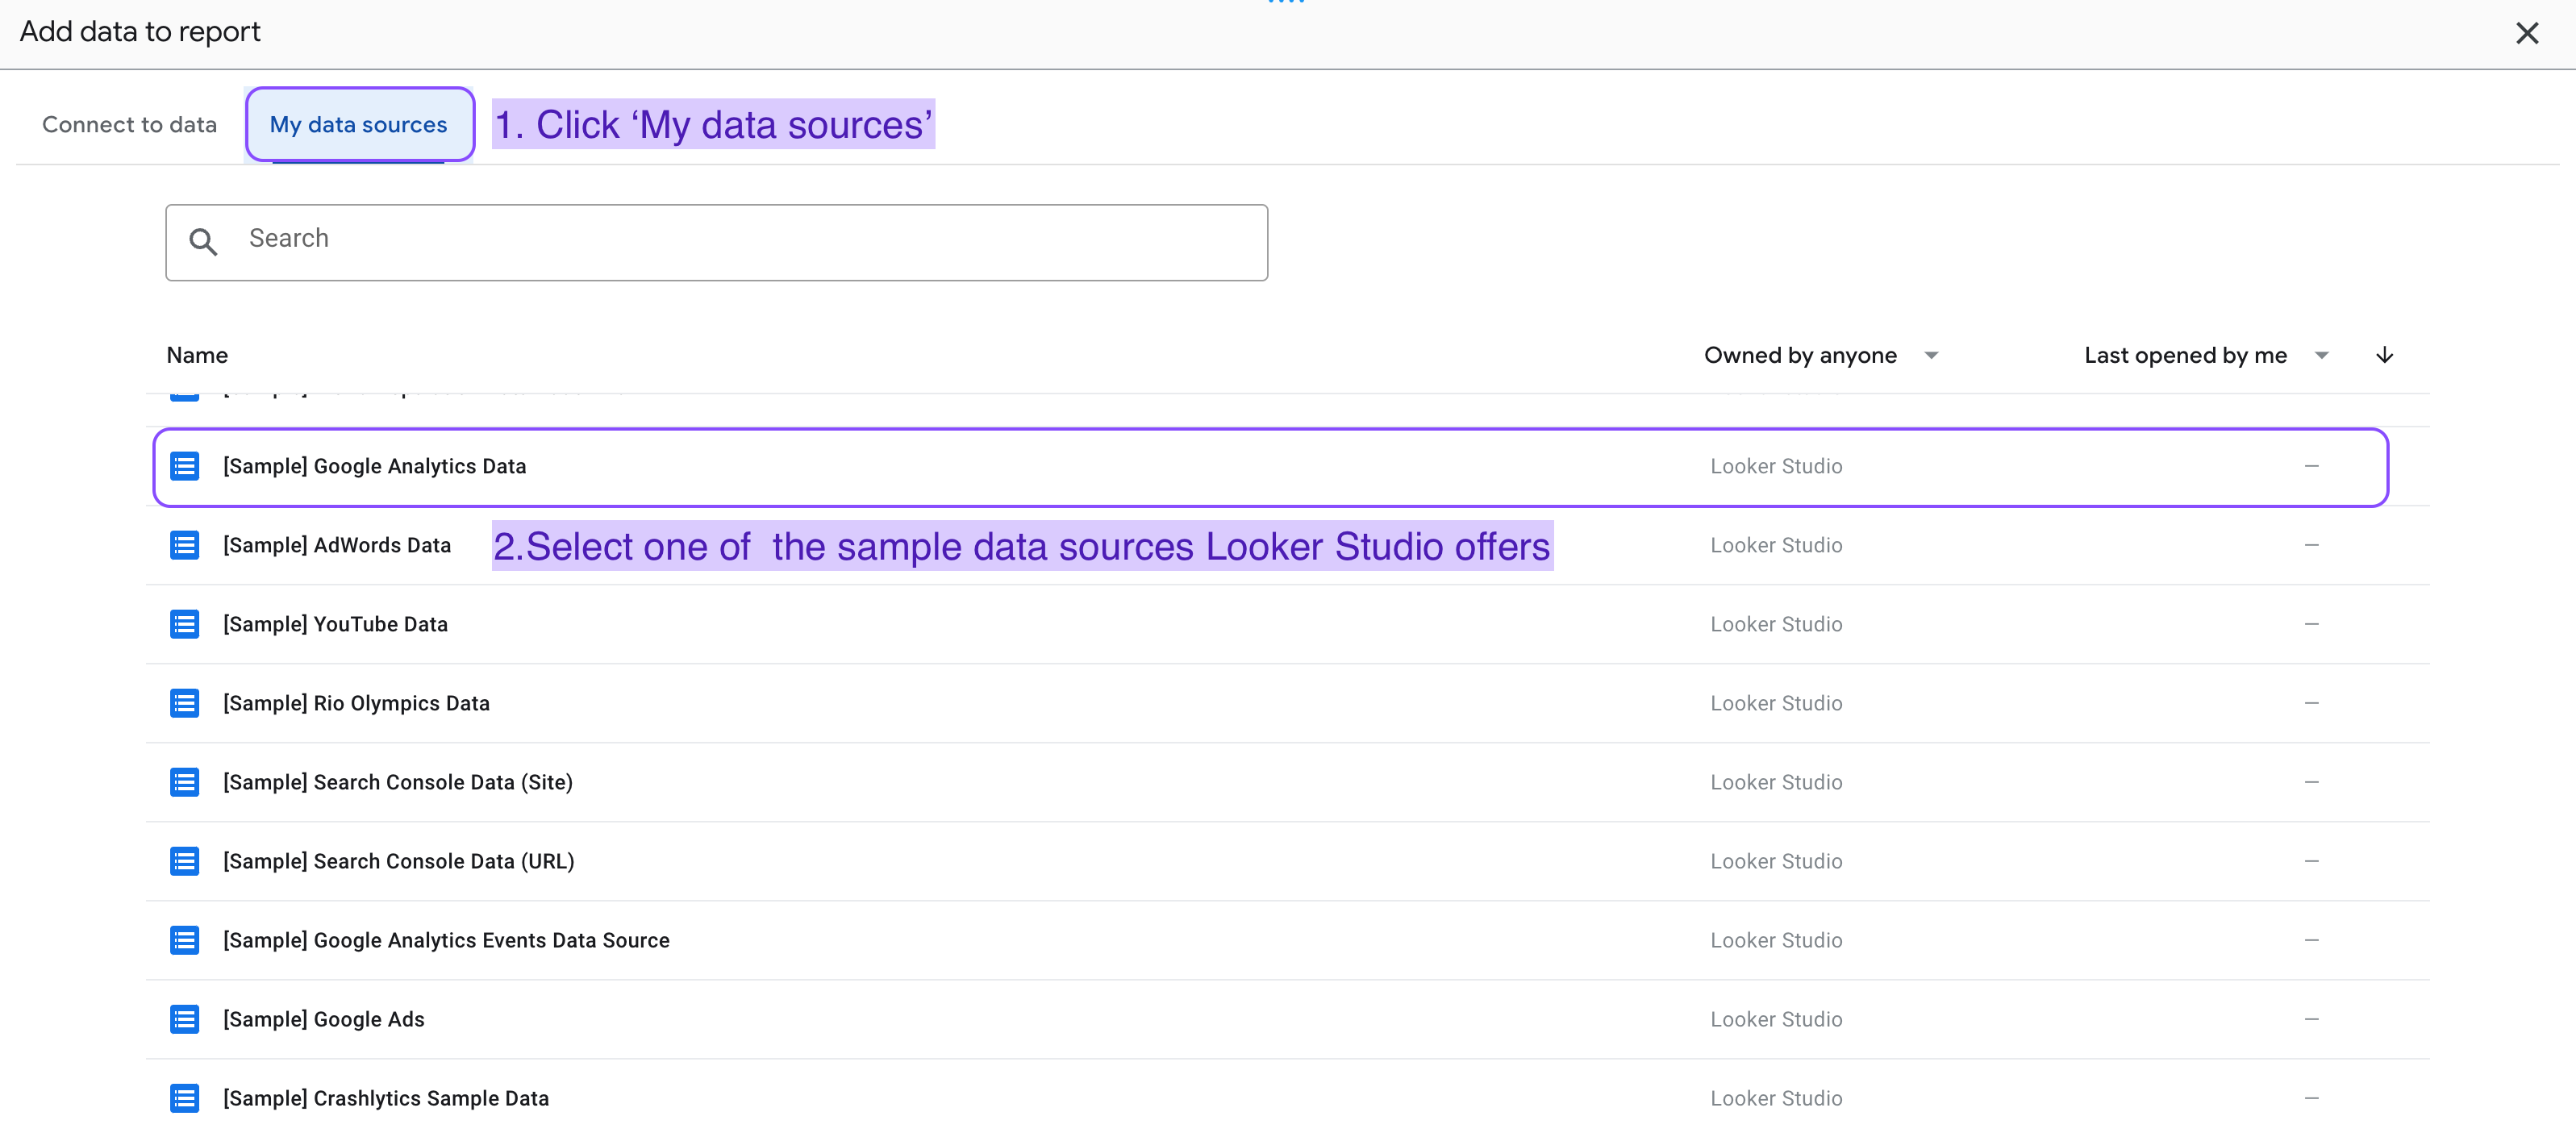 Sample datasets on 'my data sources' on Looker Studio